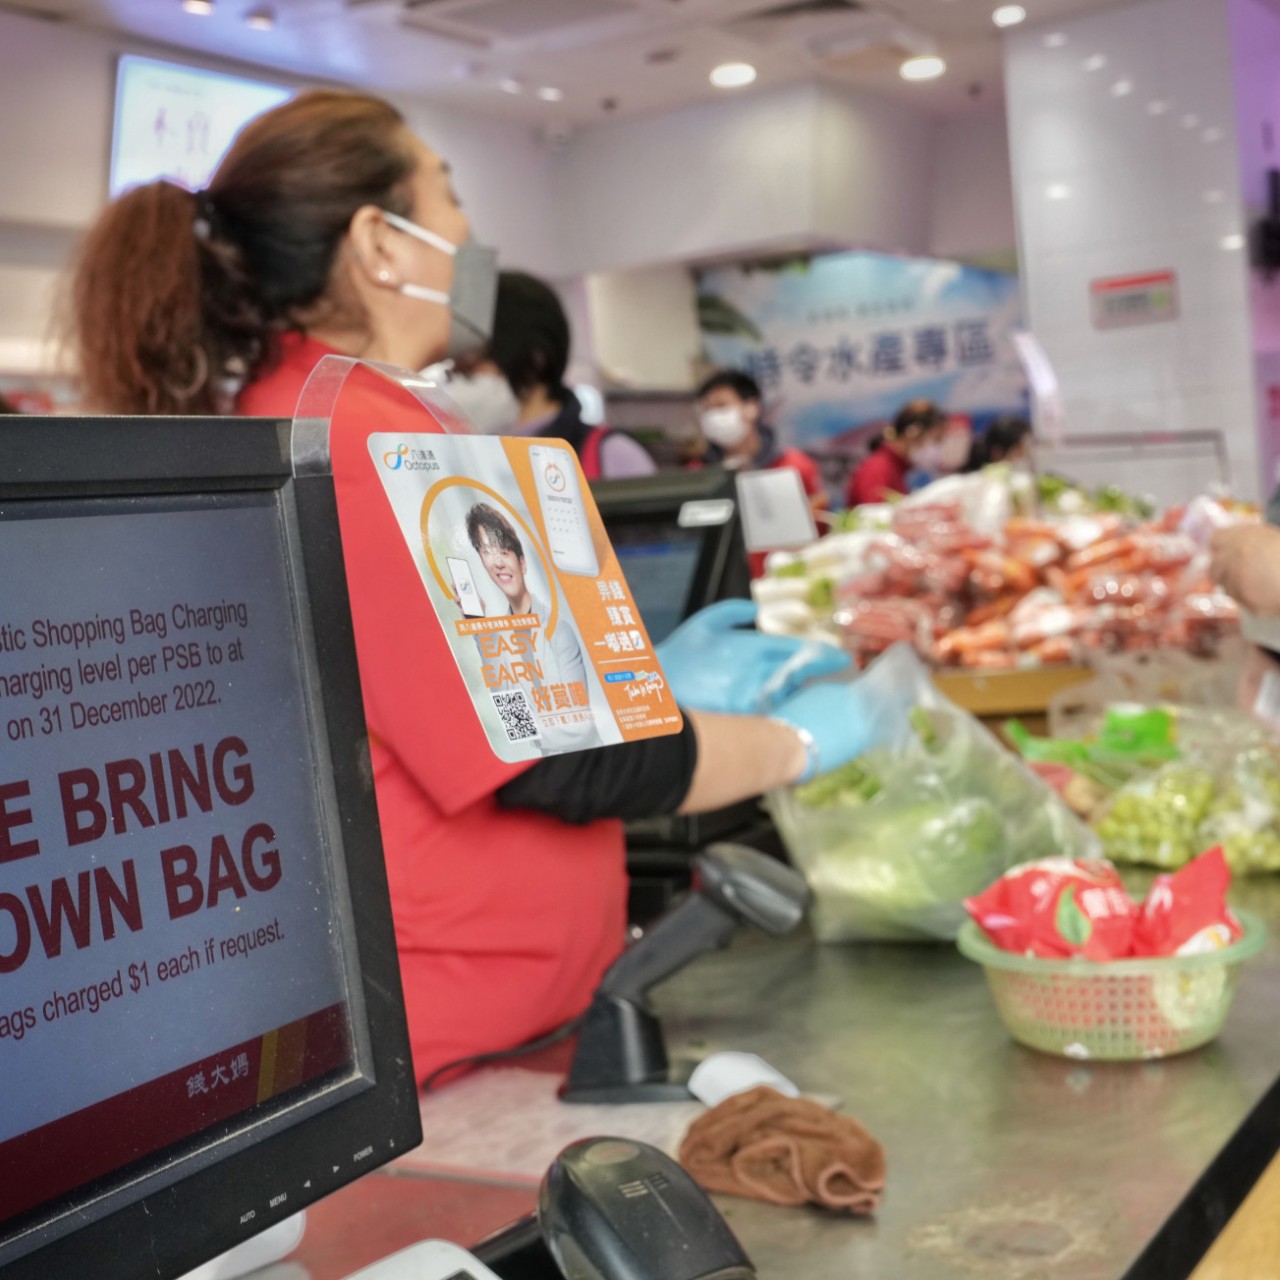 Hongkongers to pay HK$1 per plastic bag at supermarkets from next week,  with operators given 1-month grace period - YP